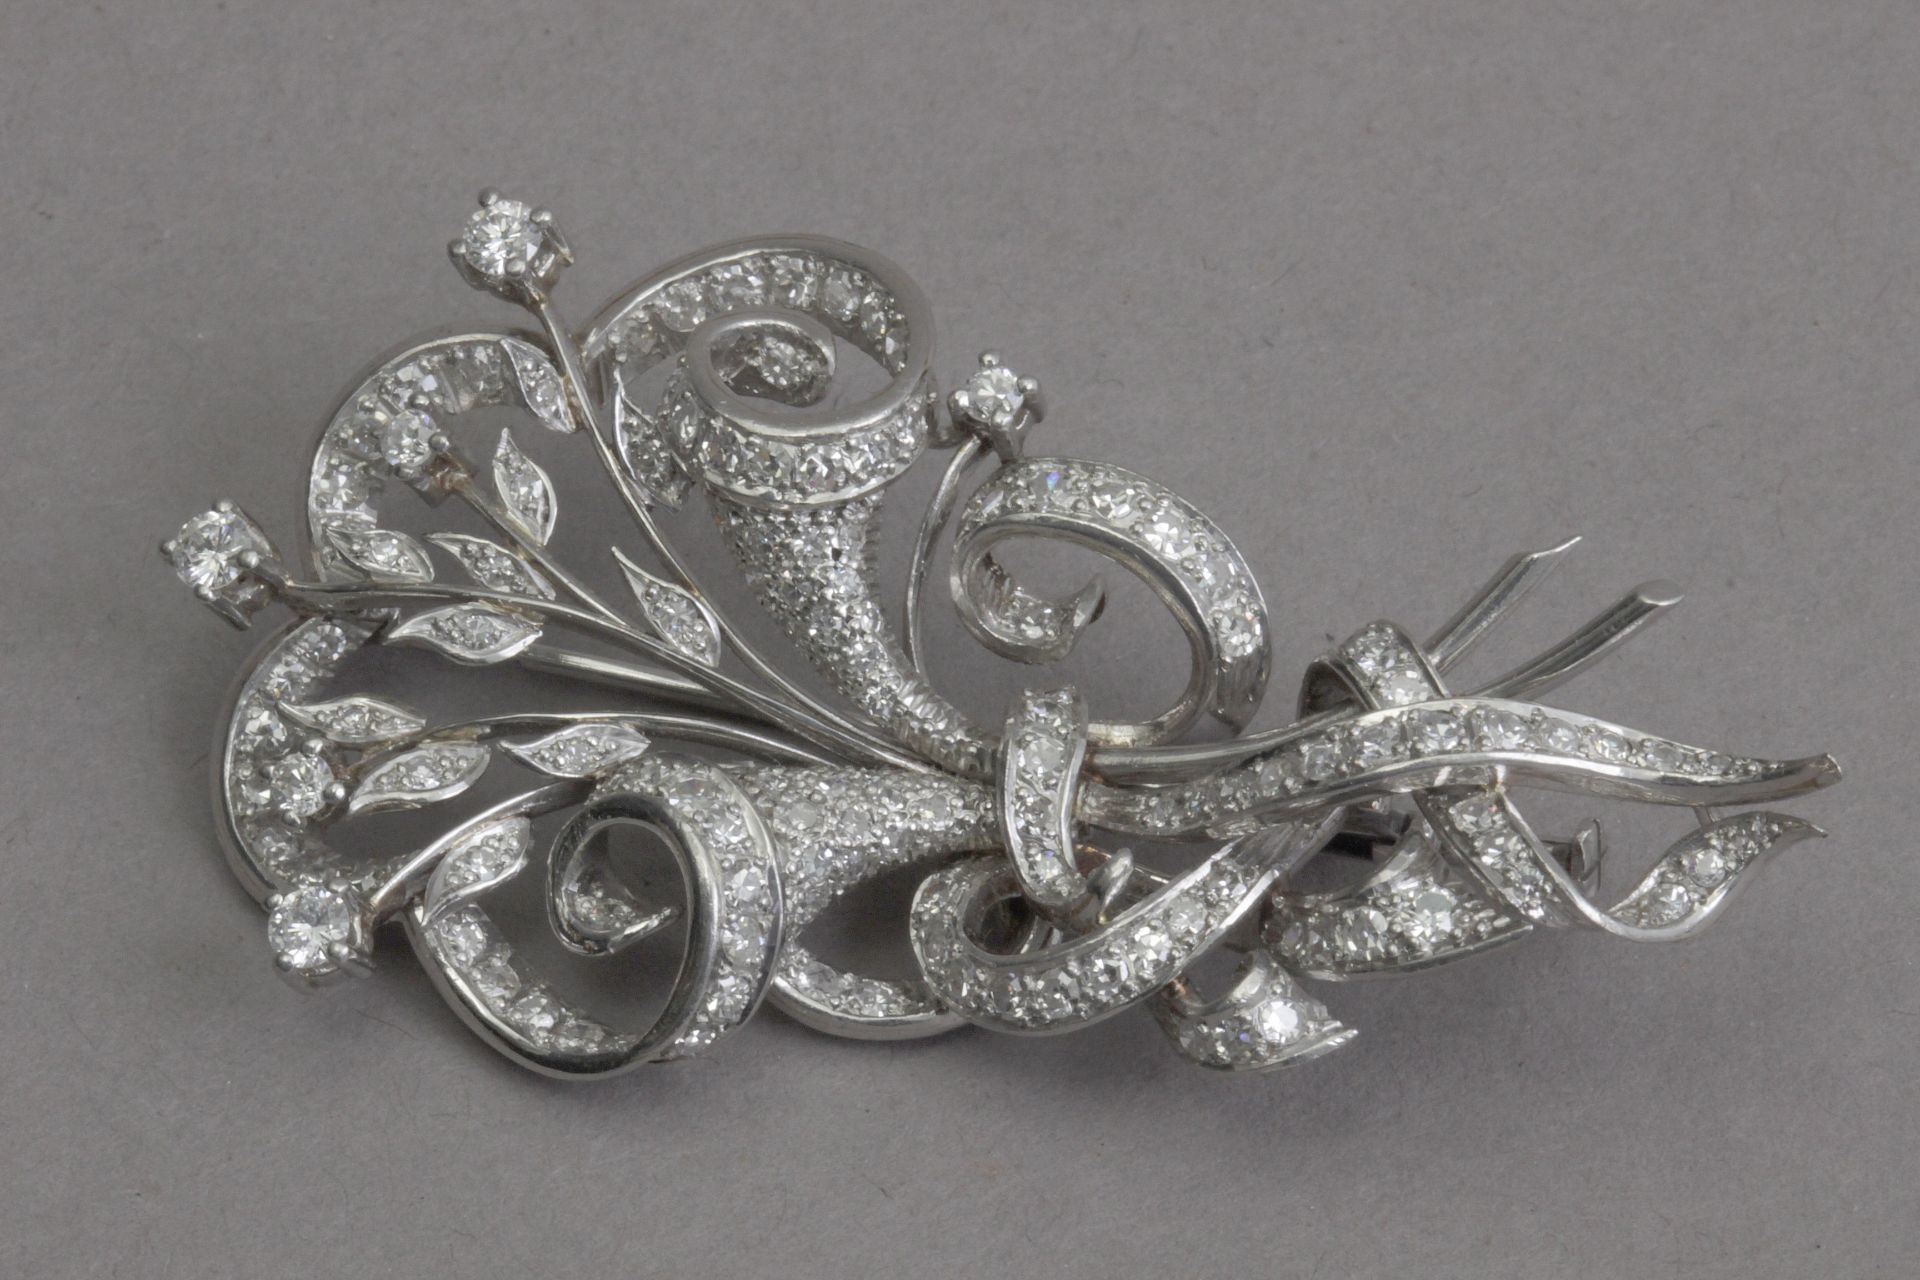 A second third of 20th century diamond brooch in a platinum setting - Image 2 of 3